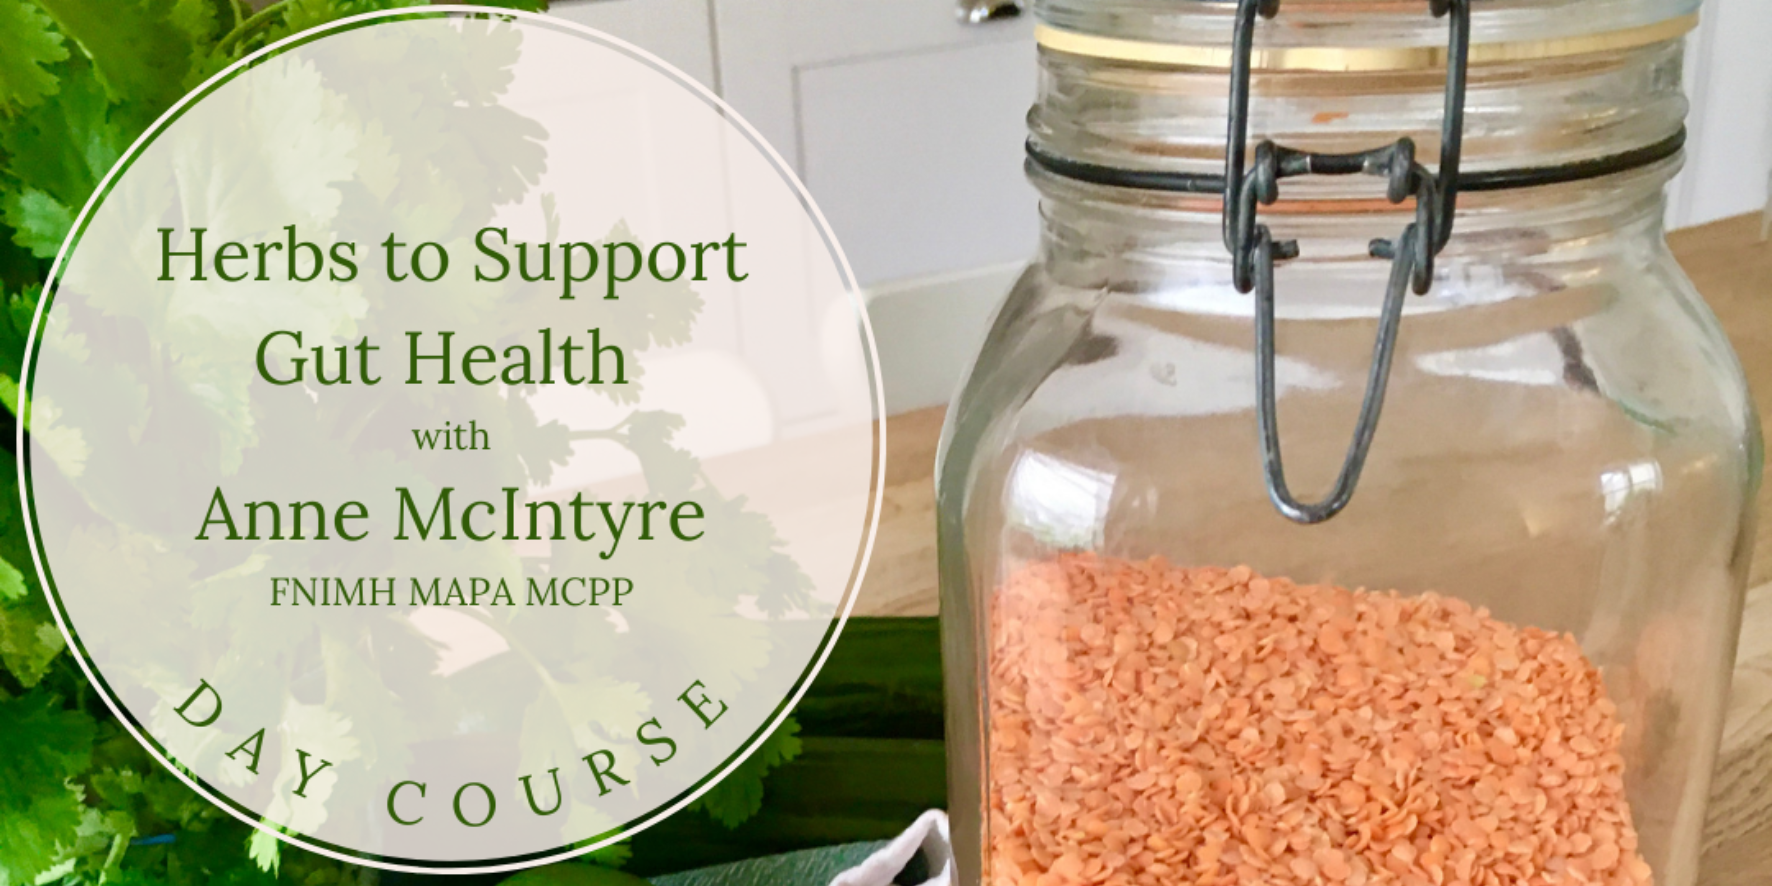 Herbs to Support Gut Health with Anne McIntyre